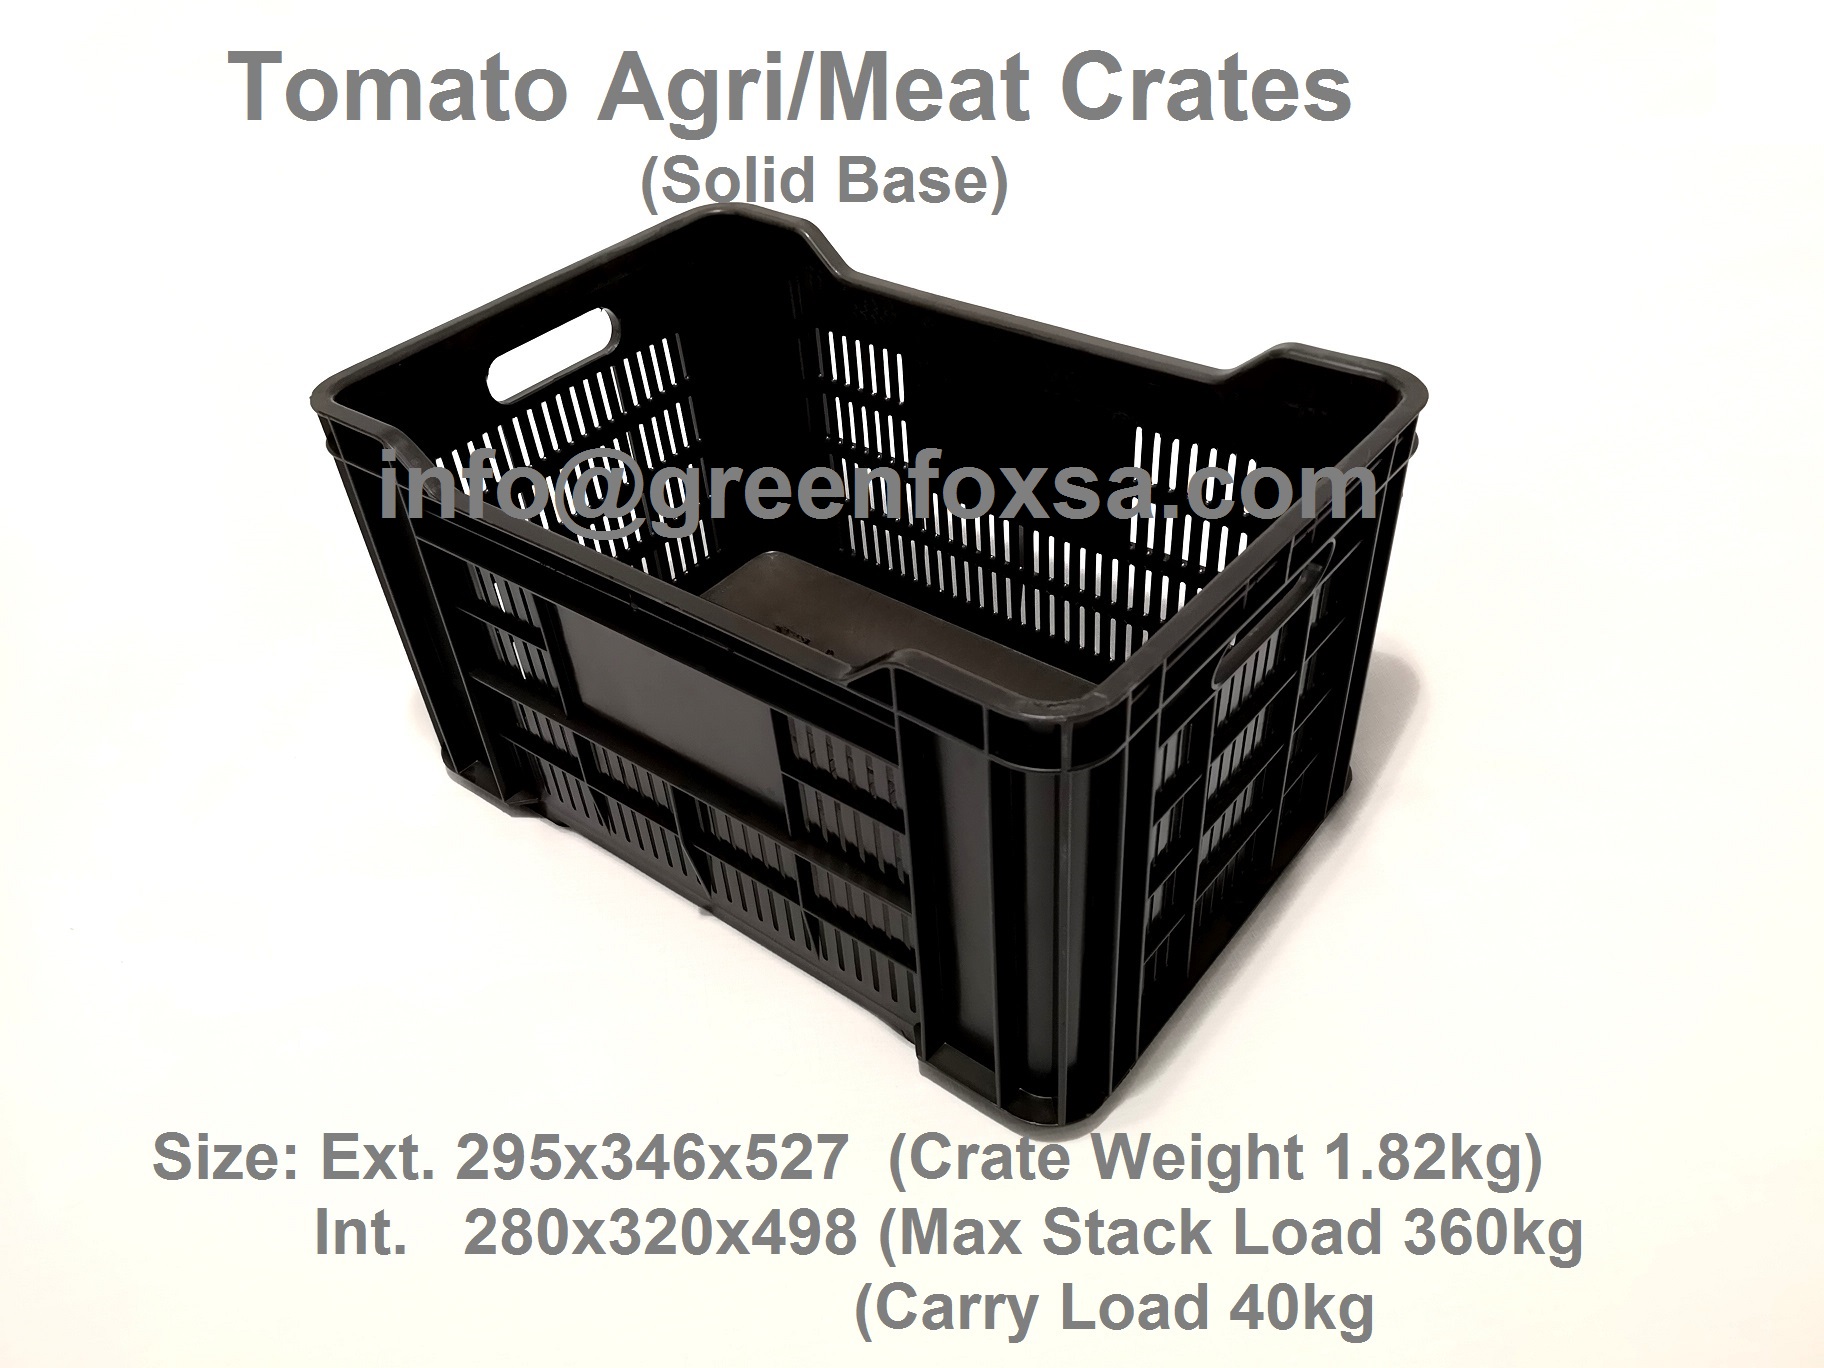 plastic-crates-agricultural-tomato-fruit-meat-lug-black-recycle-